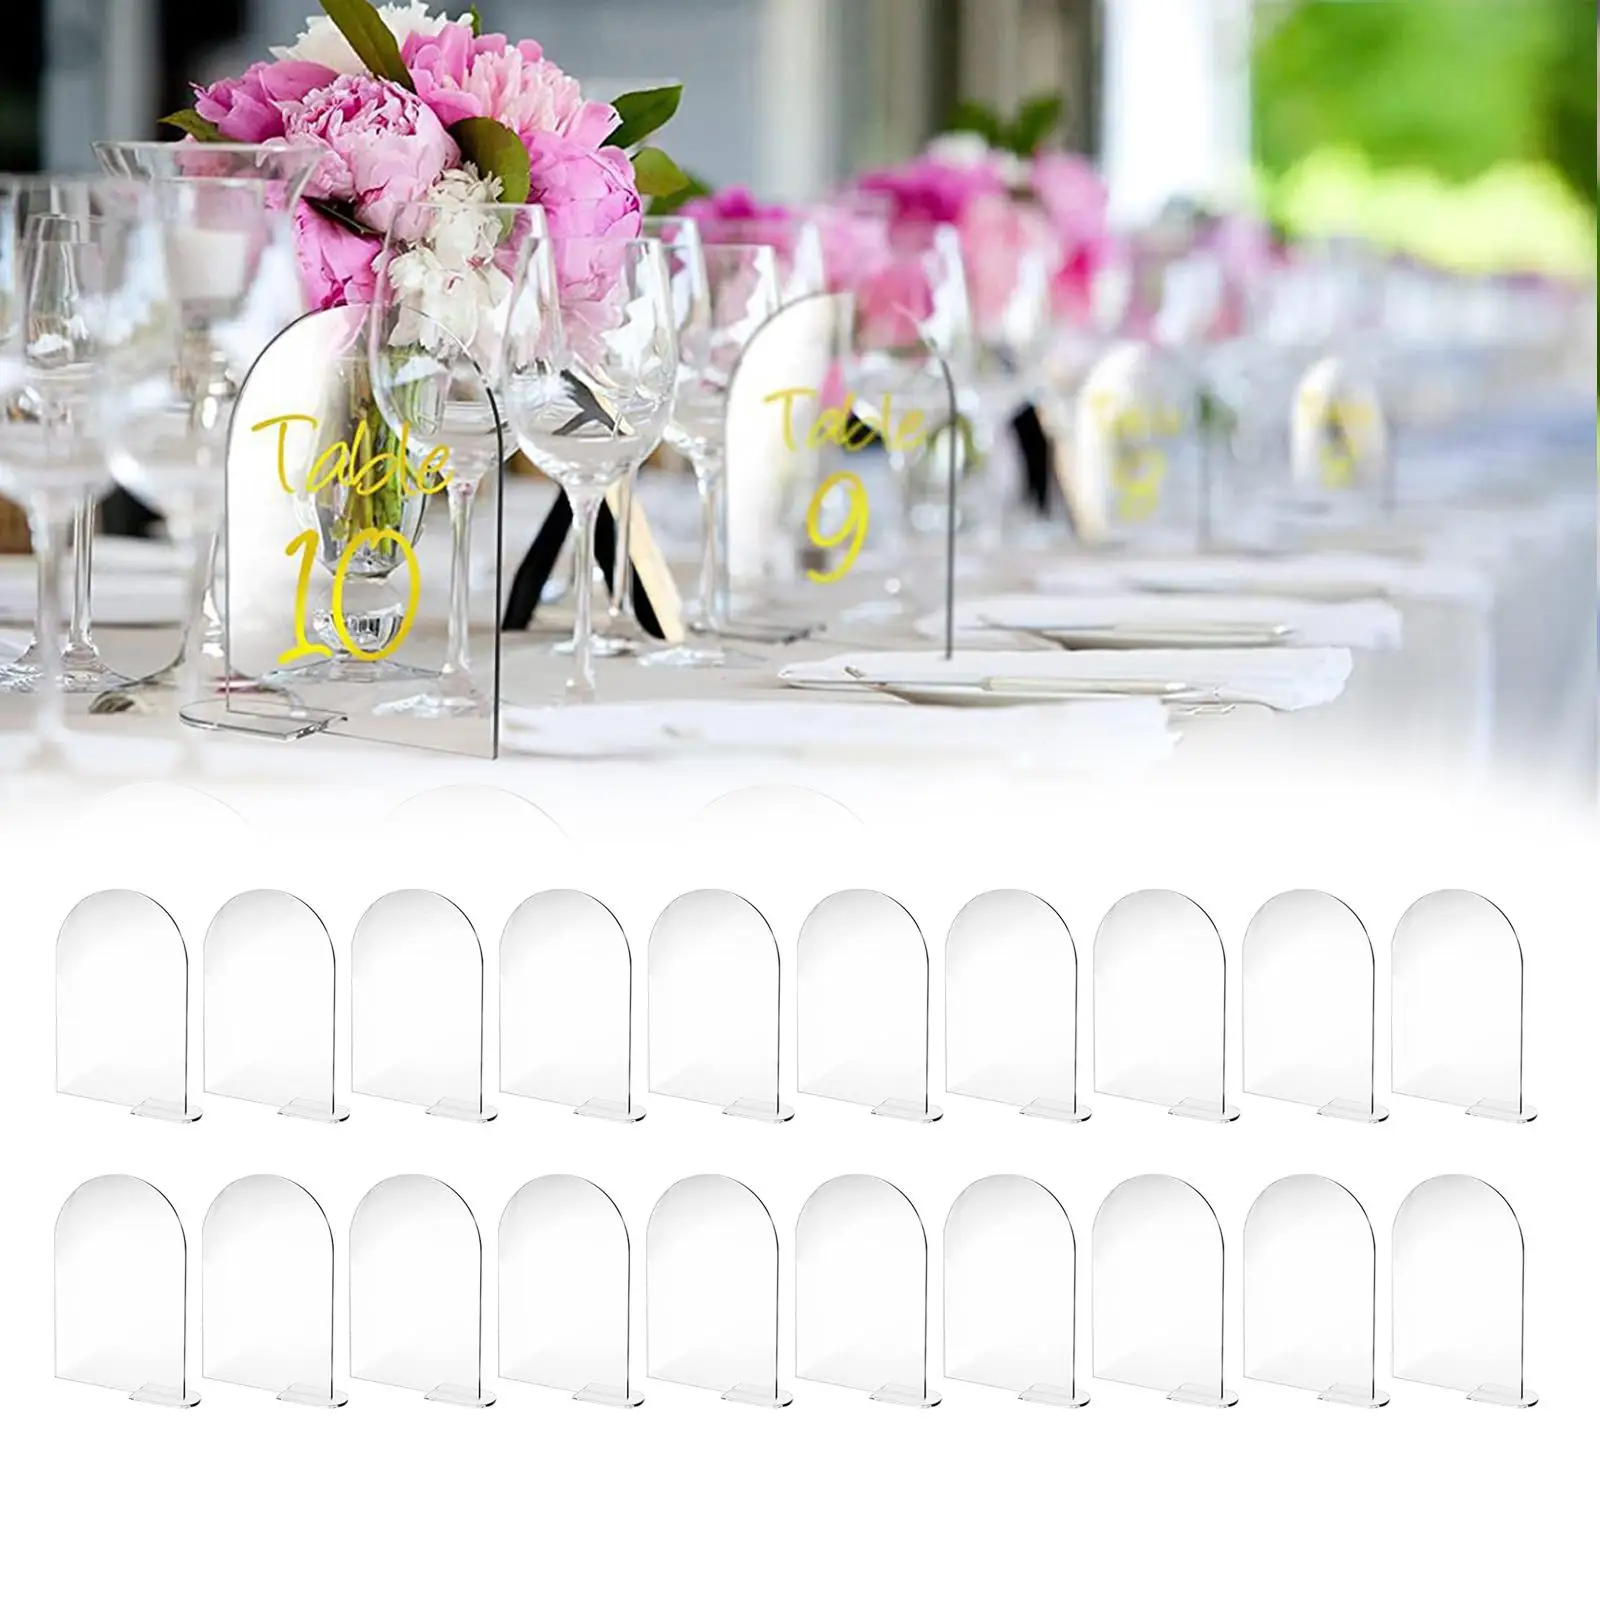 20x Acrylic Place Cards Hand Written Display with Stand Sublimation DIY Blank Table Numbers Menu Signs for Reception Restaurant